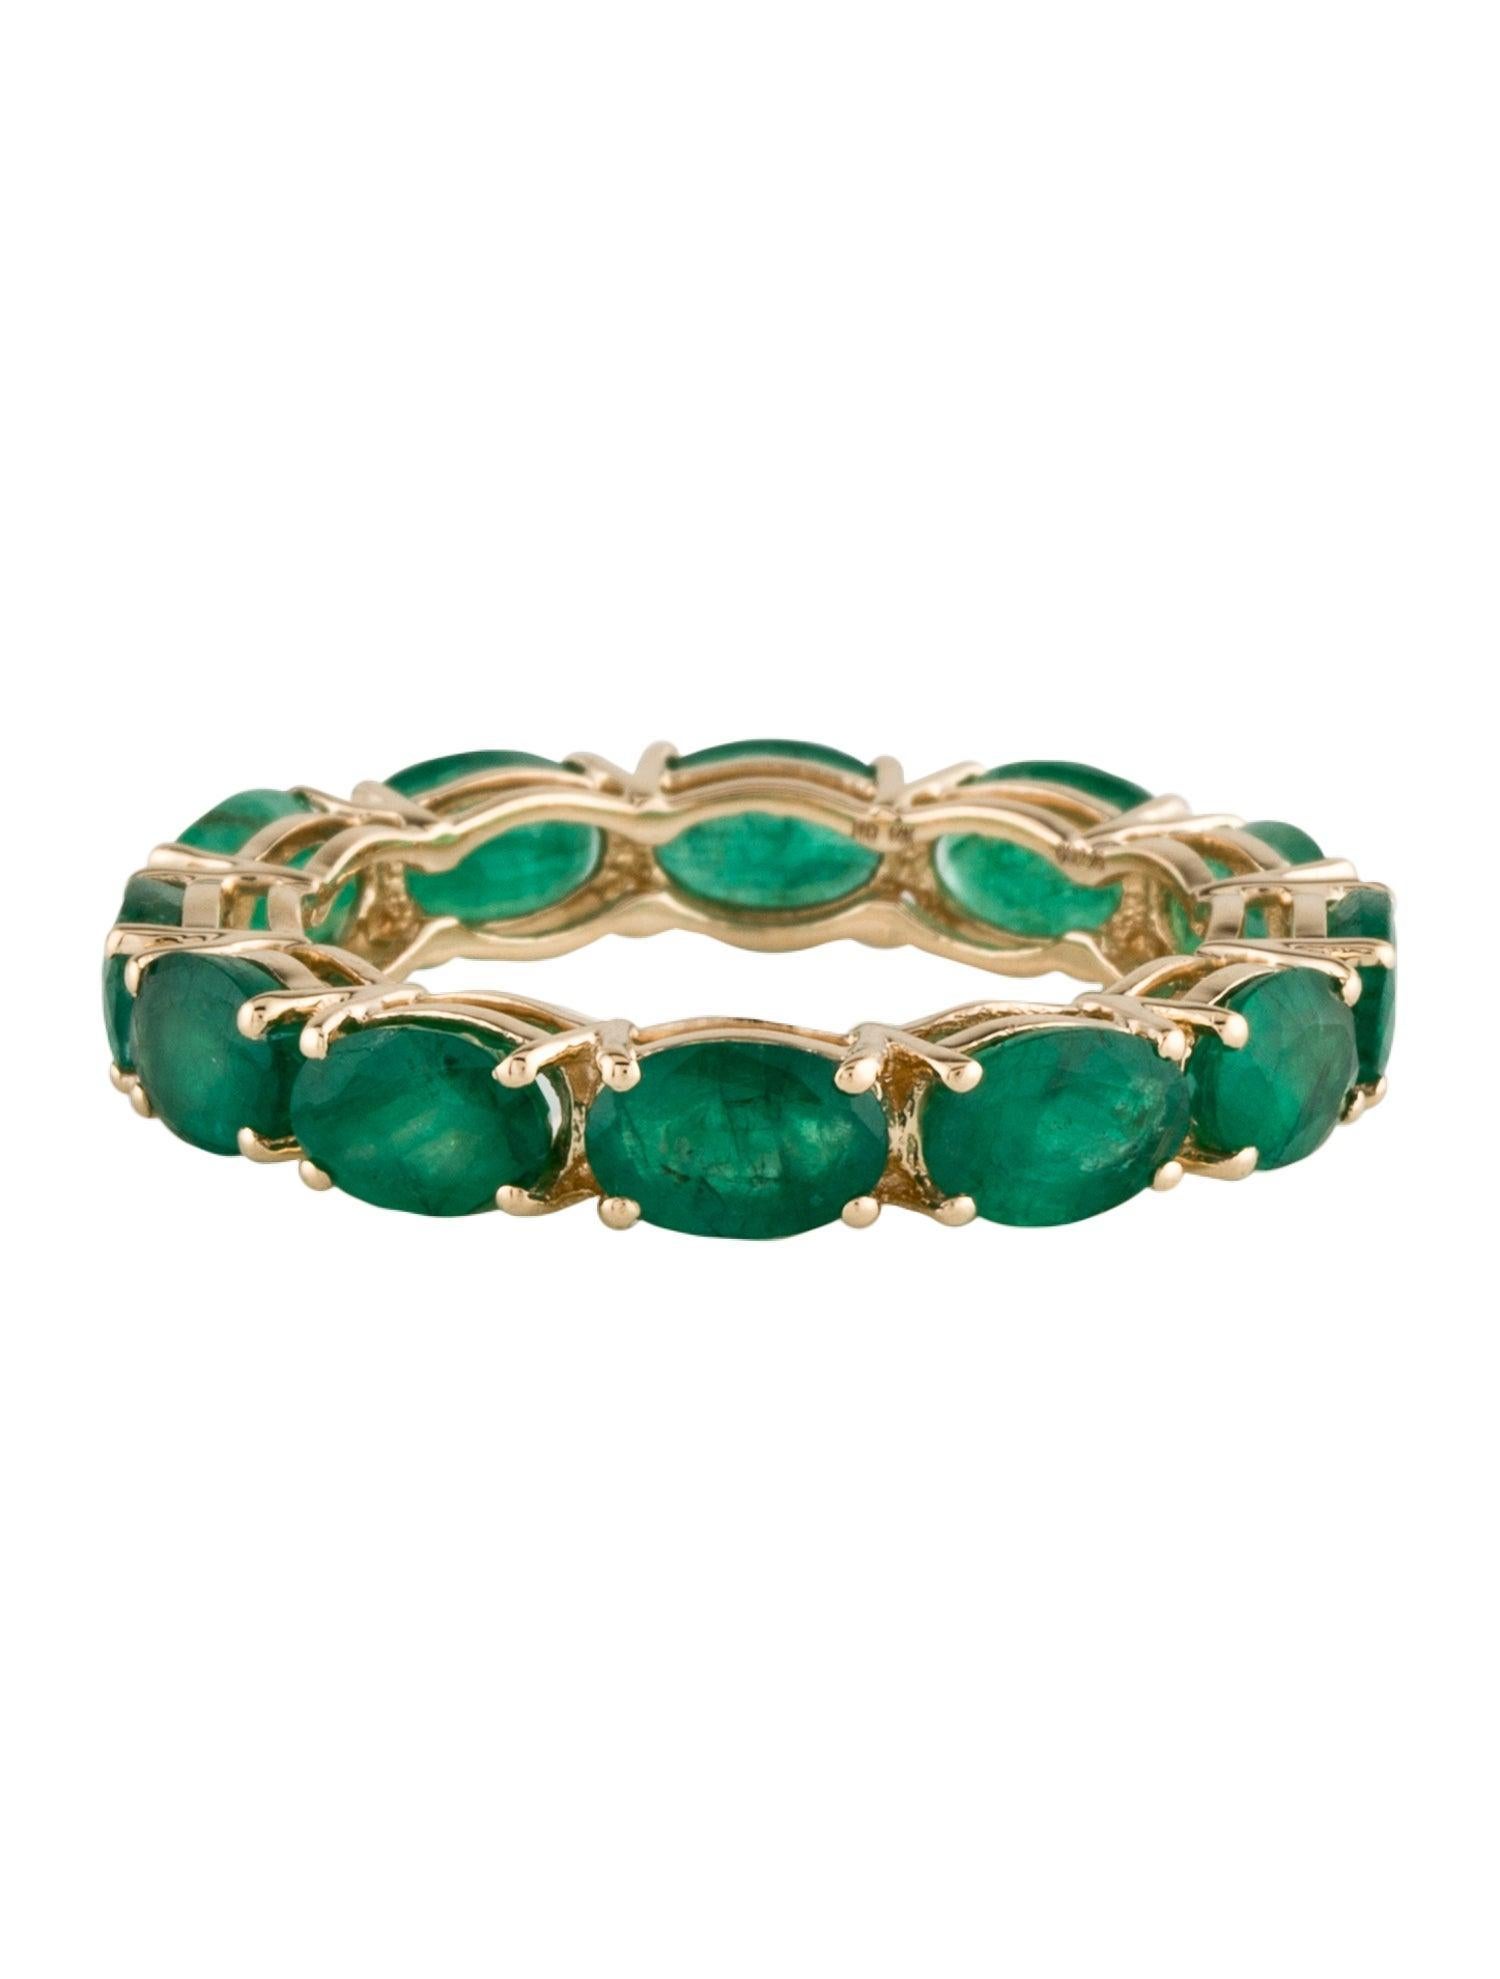 Brilliant Cut Exquisite 14K Gold 3.52ctw Emerald Eternity Band Ring - Size 8 - Luxury Jewelry For Sale